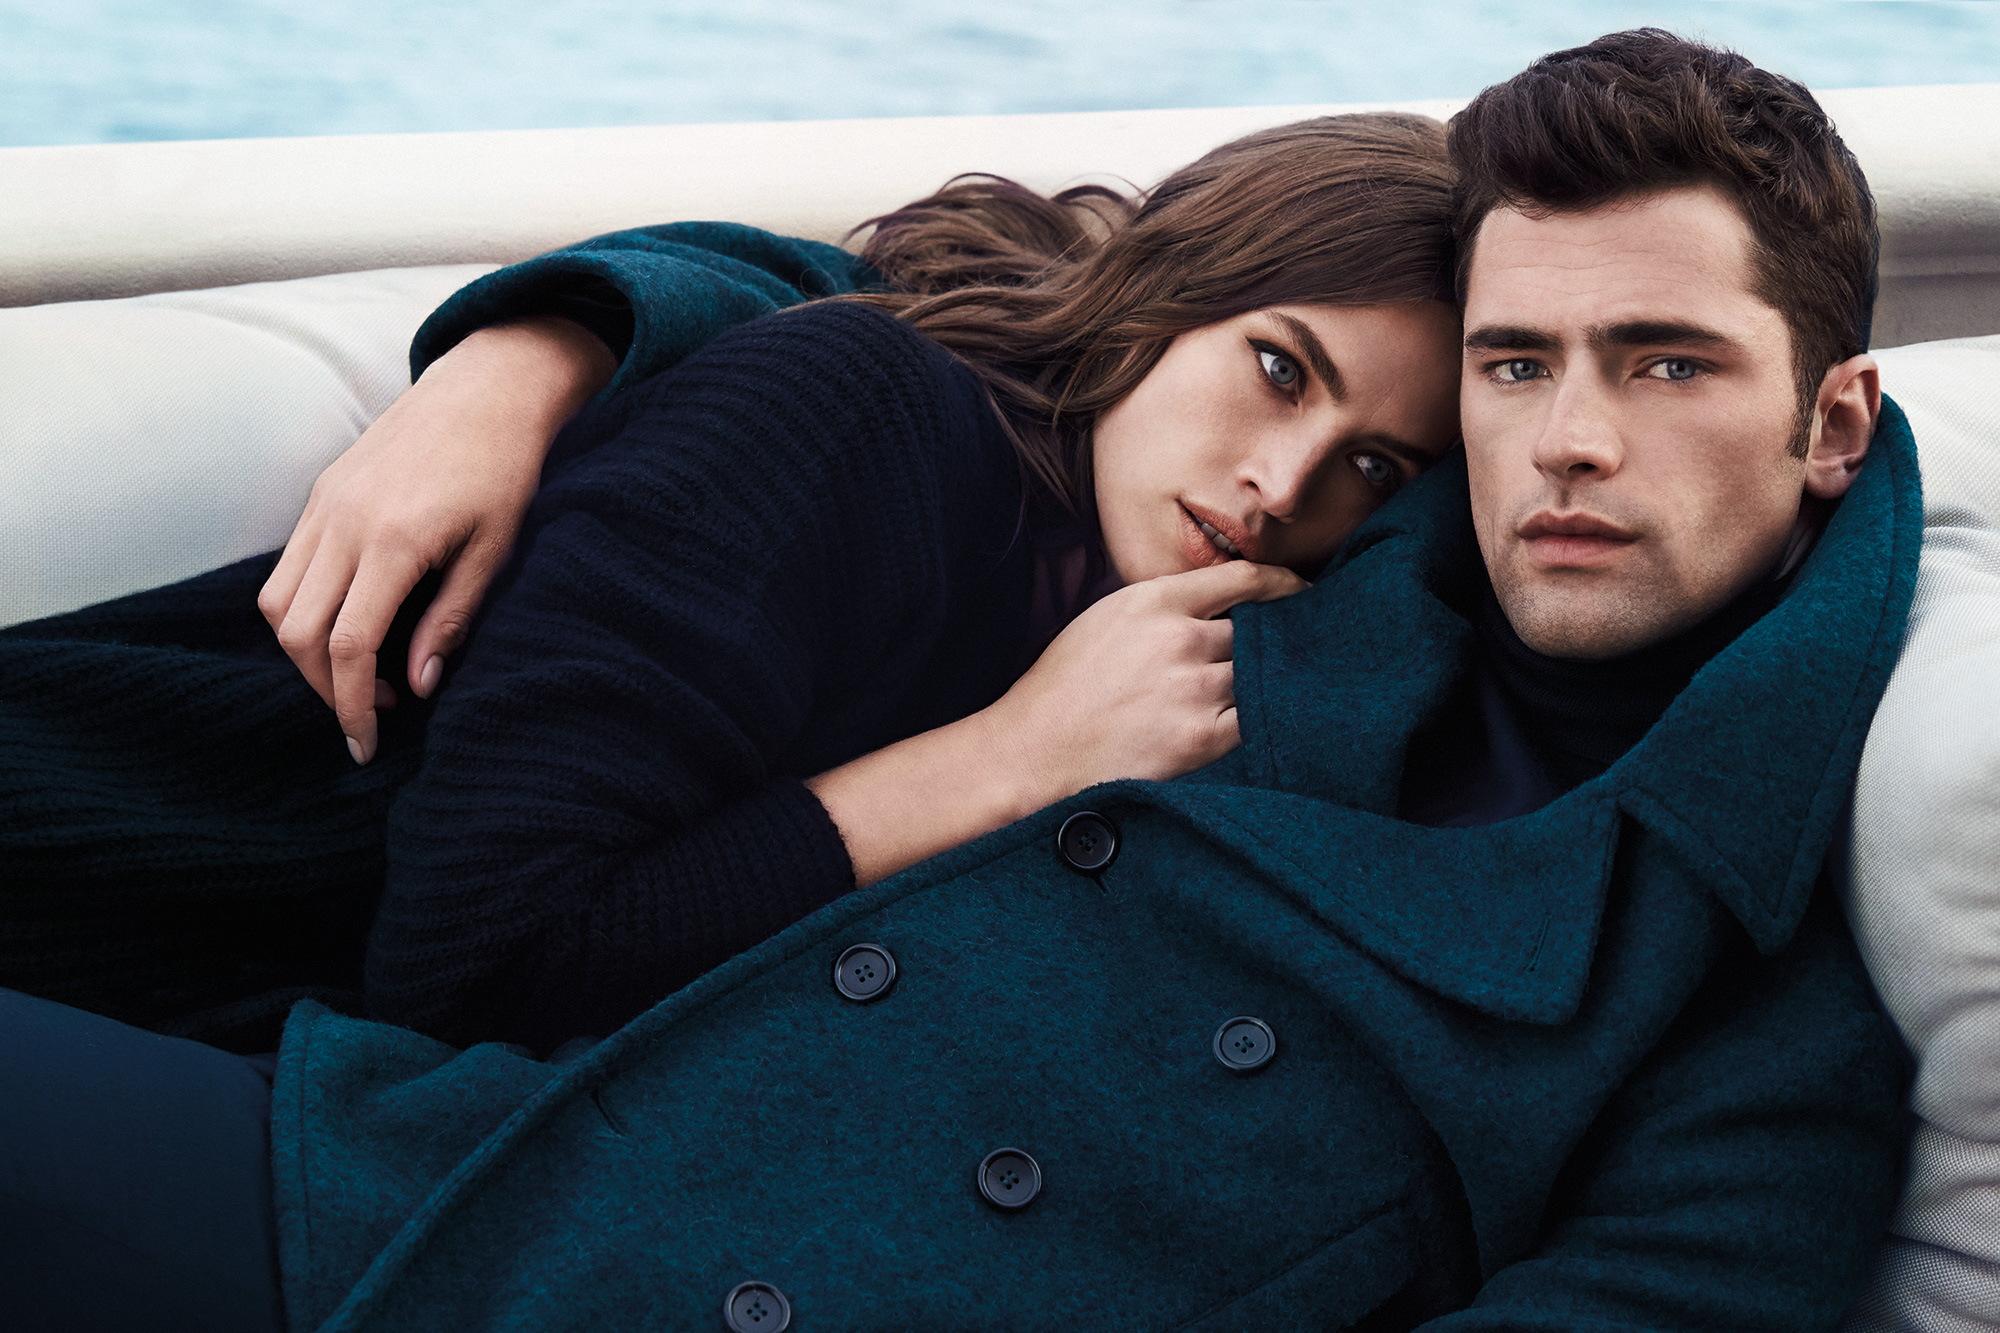 Sean O'Pry Heads to Italy for Cerruti 1881 Fall/Winter 2015 Campaign